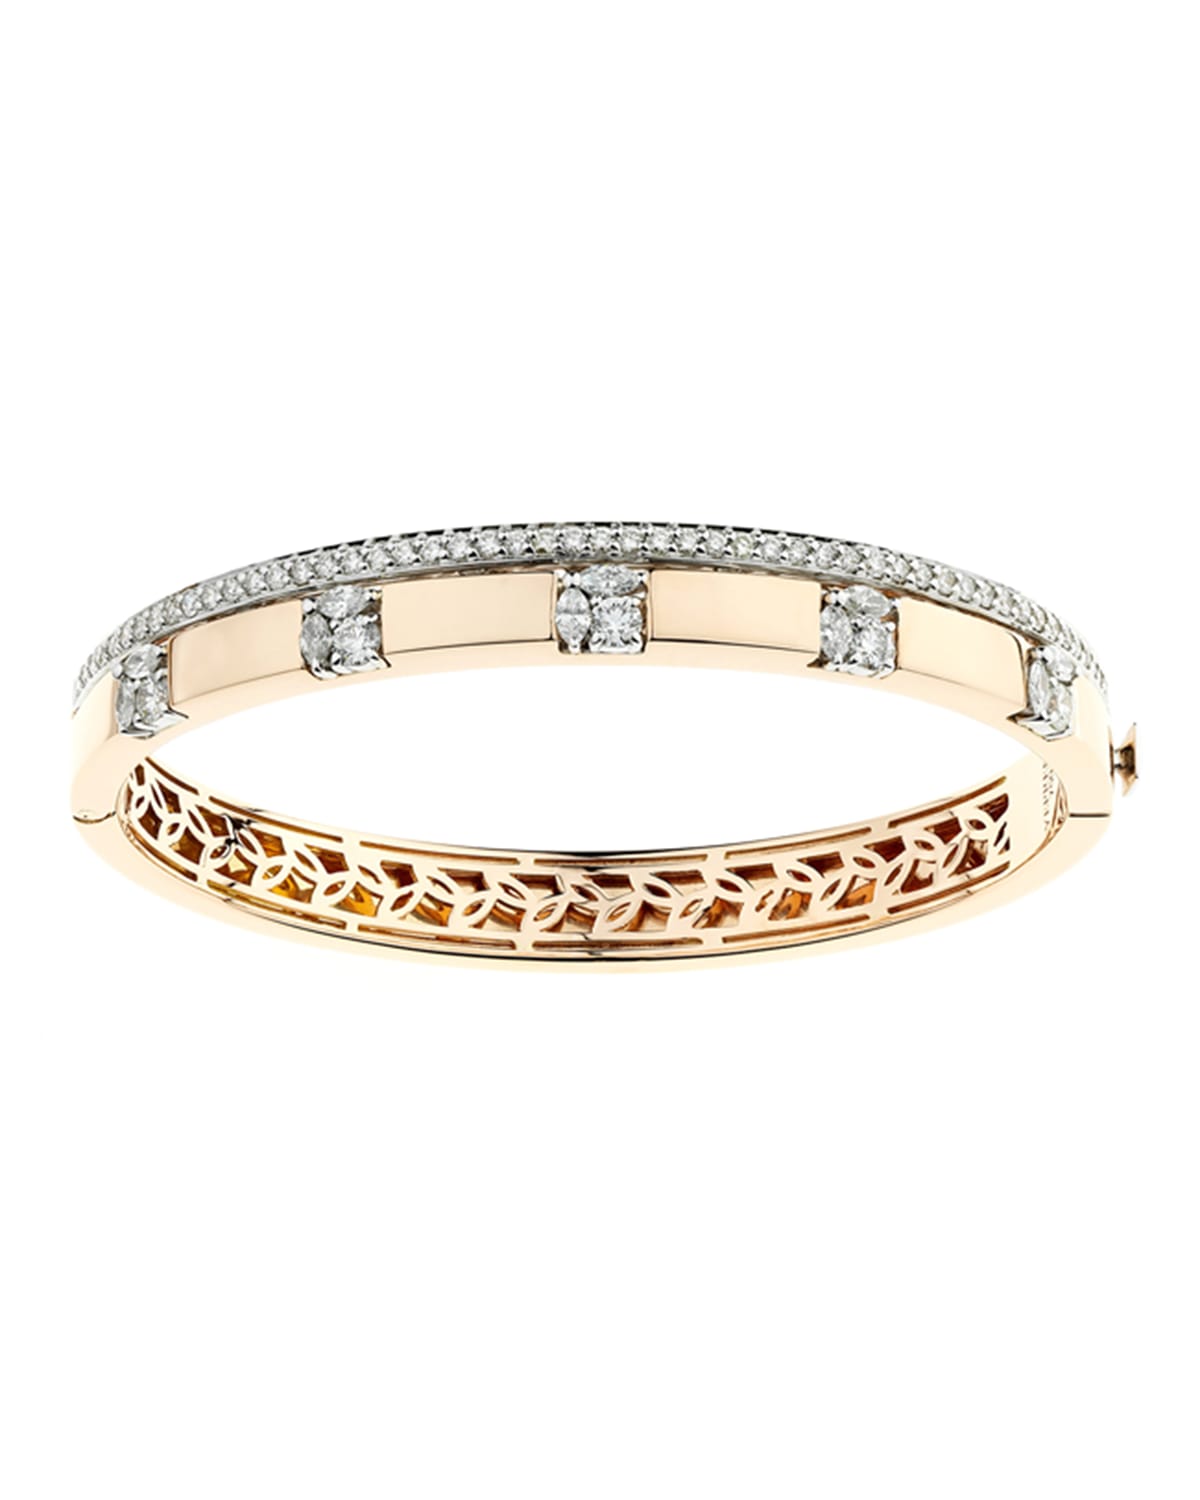 Round & Marquise Diamond Bangle in 18k Gold, 1.81tcw